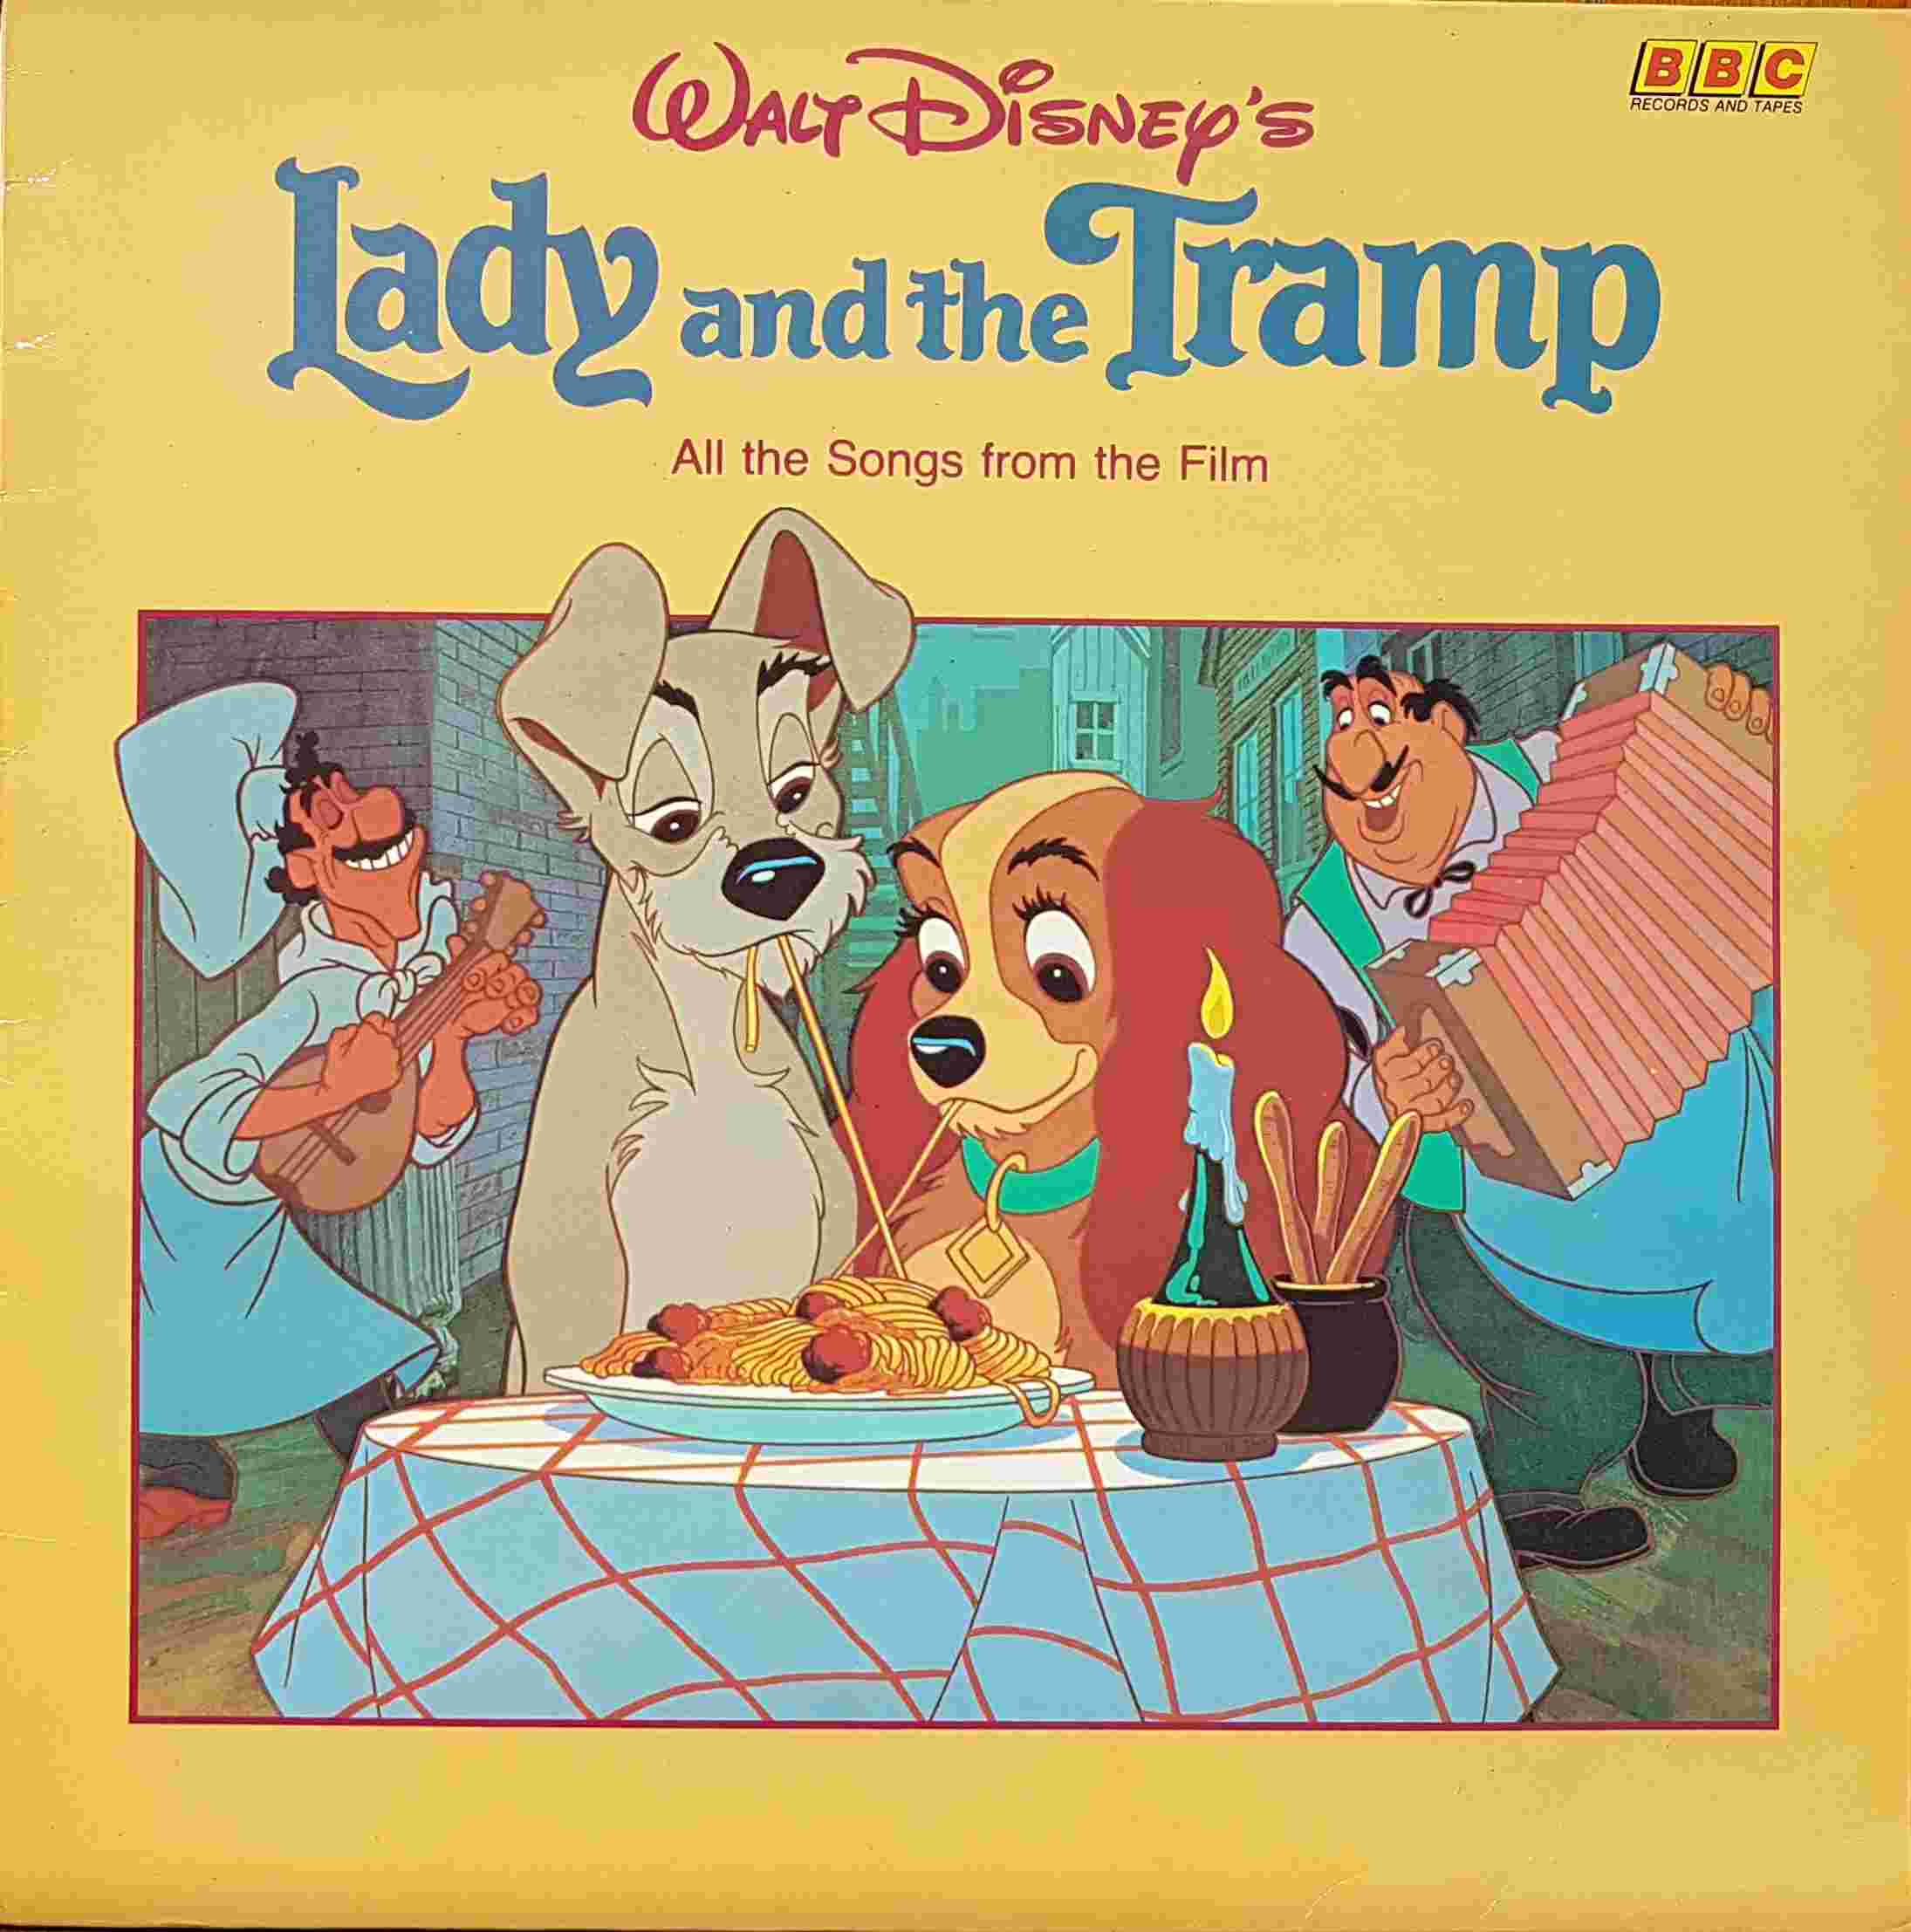 Picture of REC 538 Lady and the tramp by artist Peggy Lee / Sonny Burke from the BBC albums - Records and Tapes library